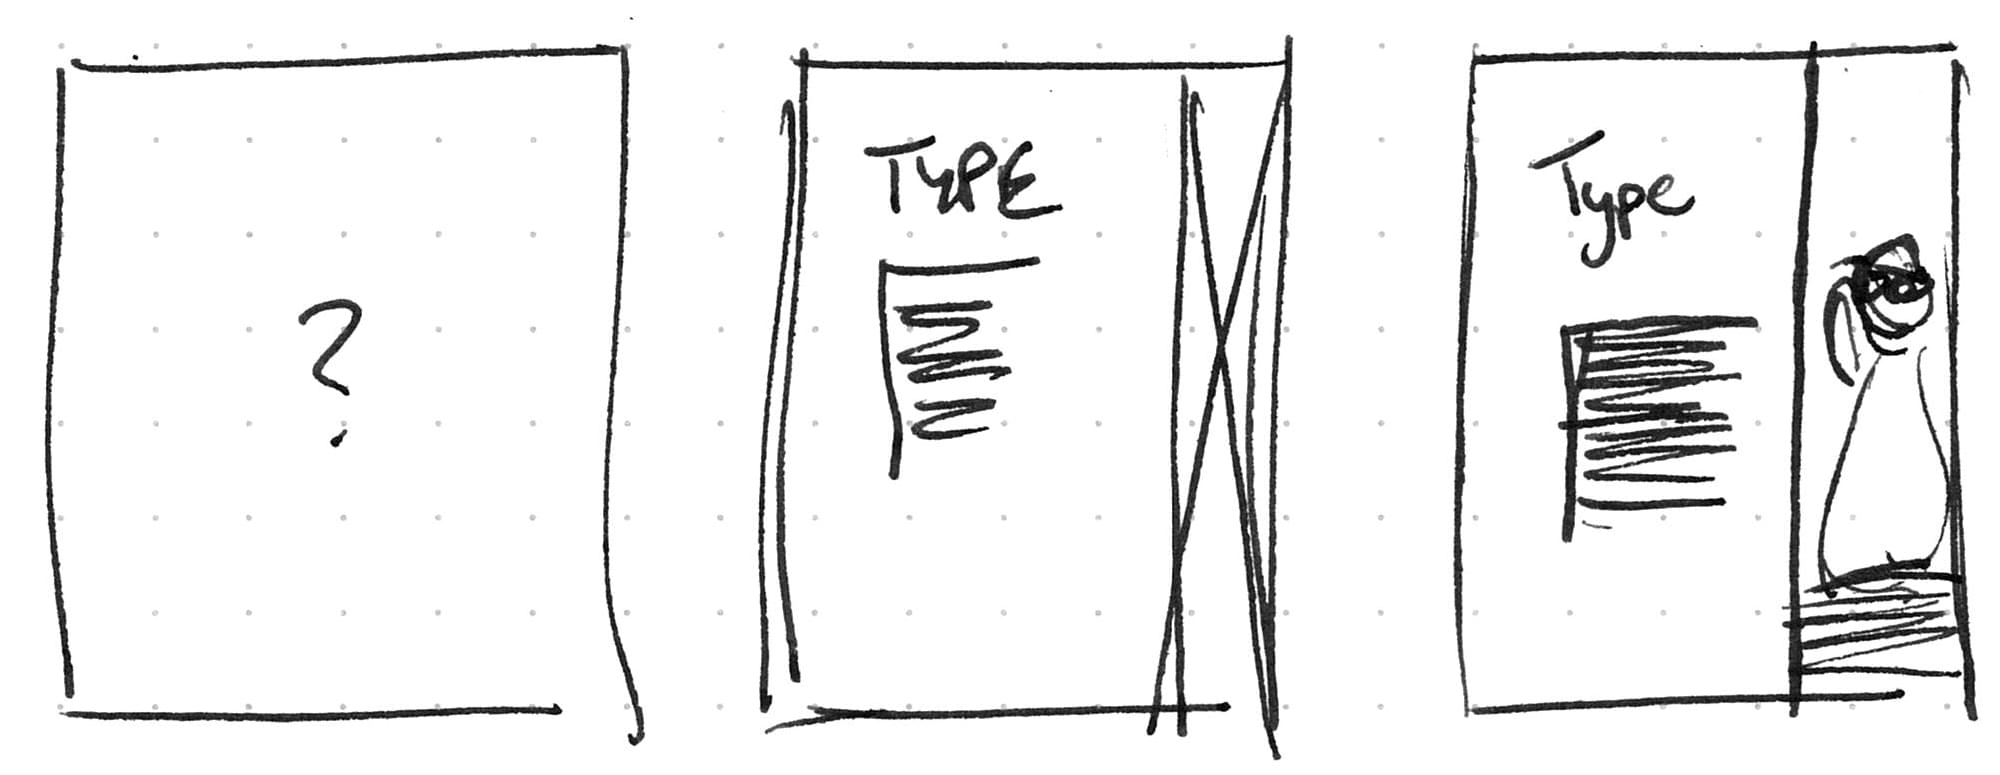 A series of three sketches of a page. One with a question mark and two with content positioned